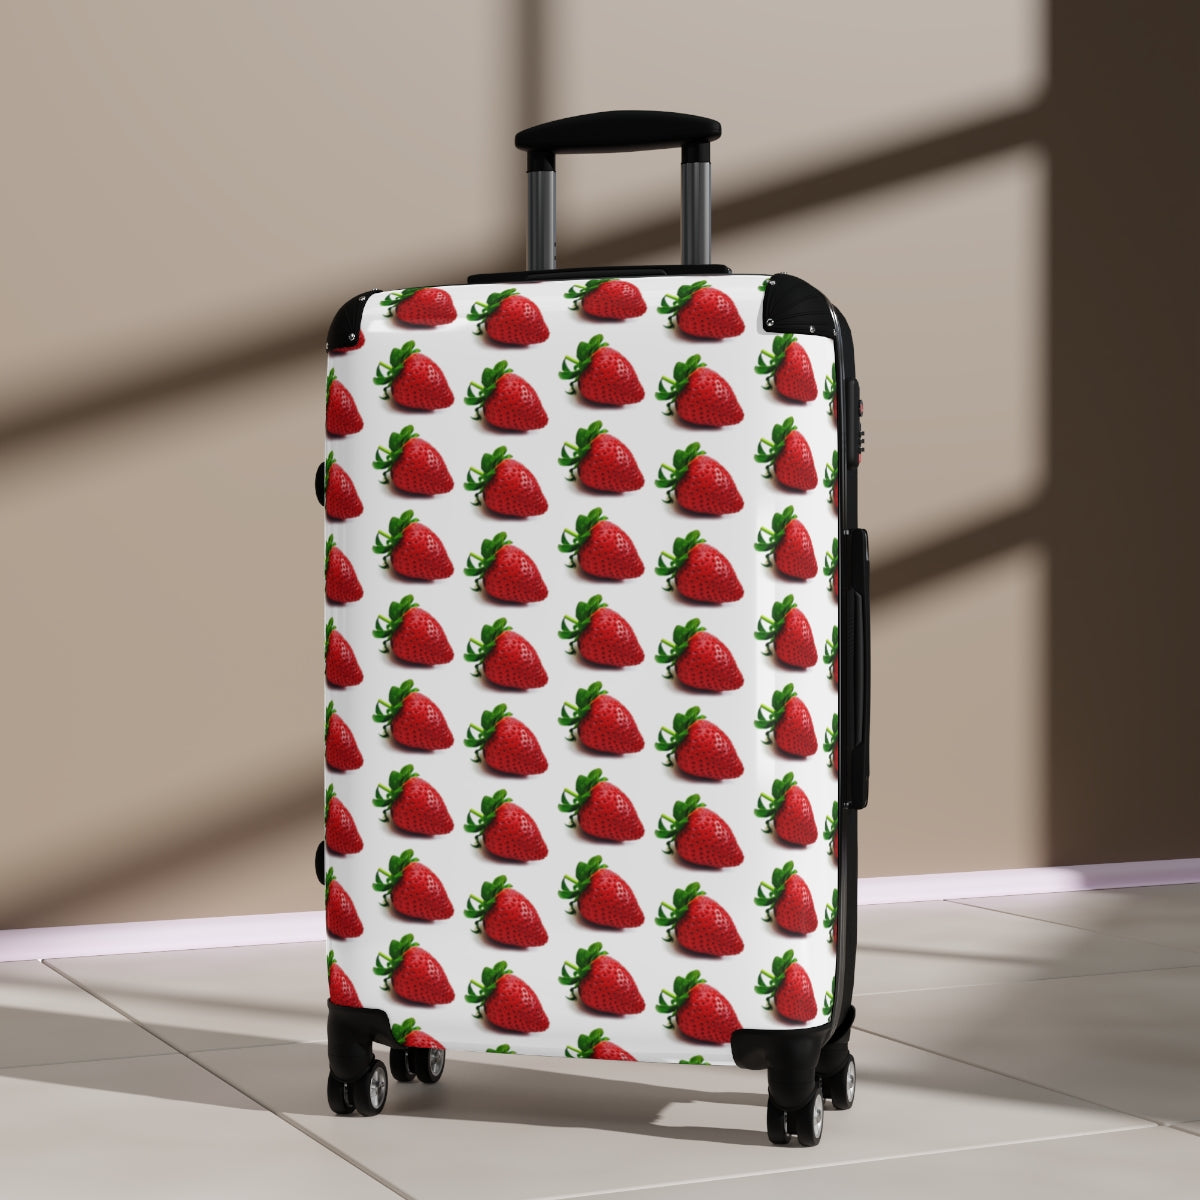 Getrott Strawberry Fruit Pattern Cabin Suitcase Inner Pockets Extended Storage Adjustable Telescopic Handle Inner Pockets Double wheeled Polycarbonate Hard-shell Built-in Lock